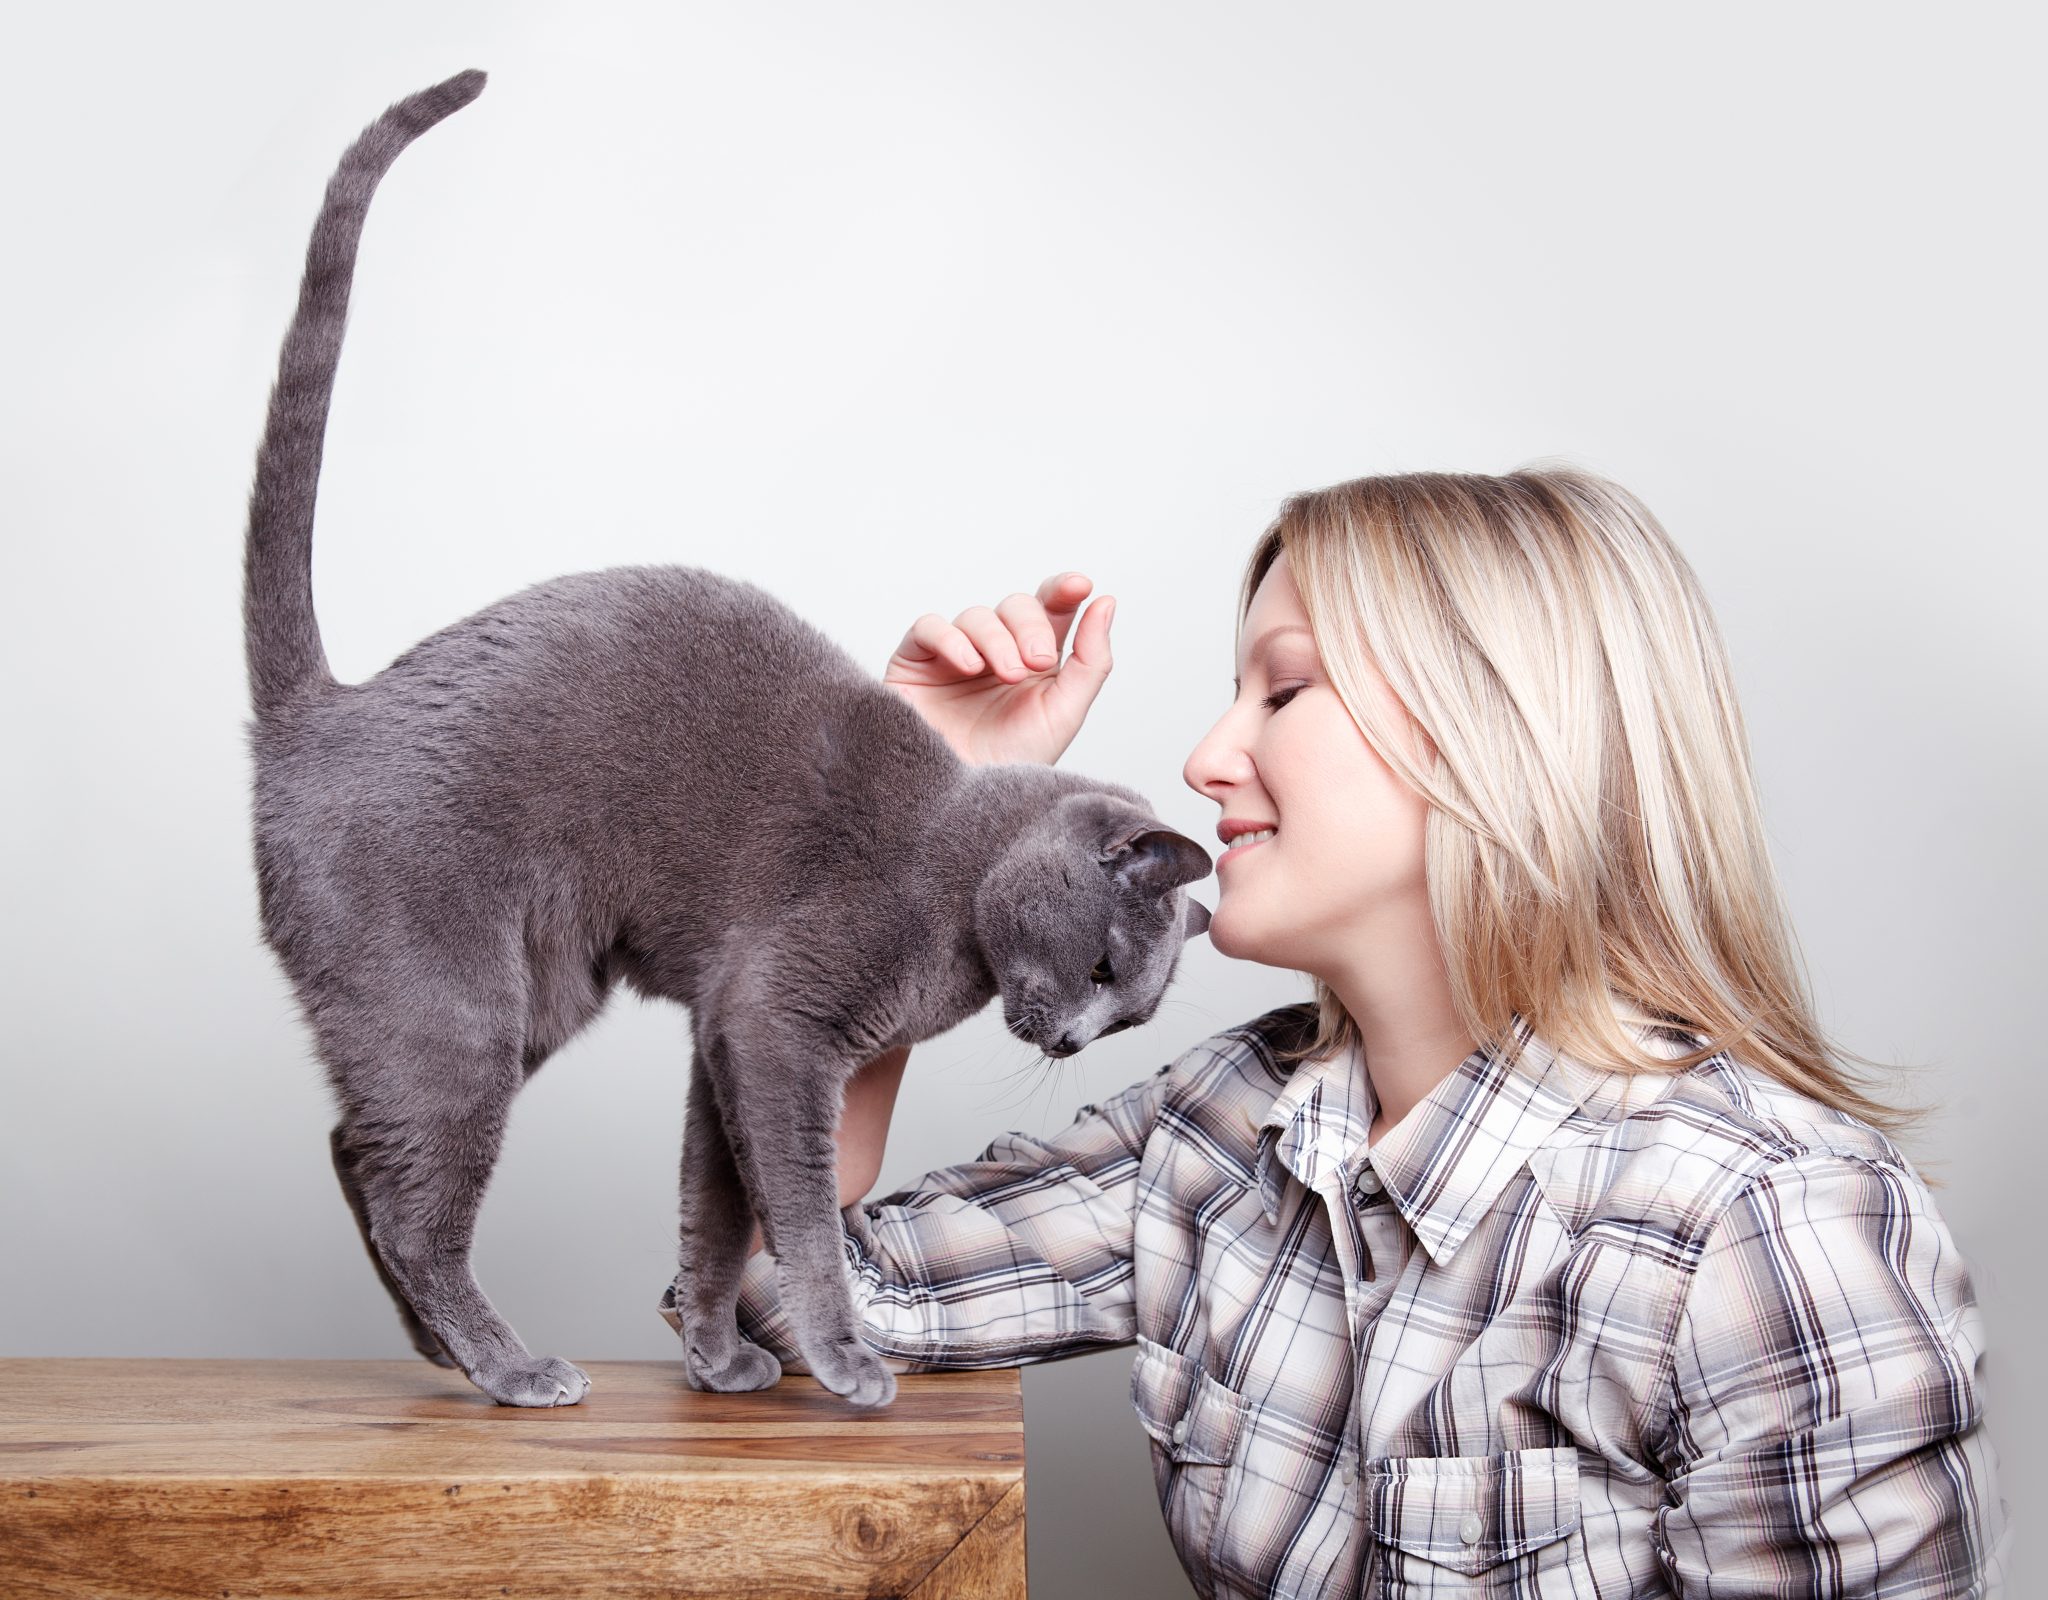 Blone Woman with Russian Blue Cat showing her affection